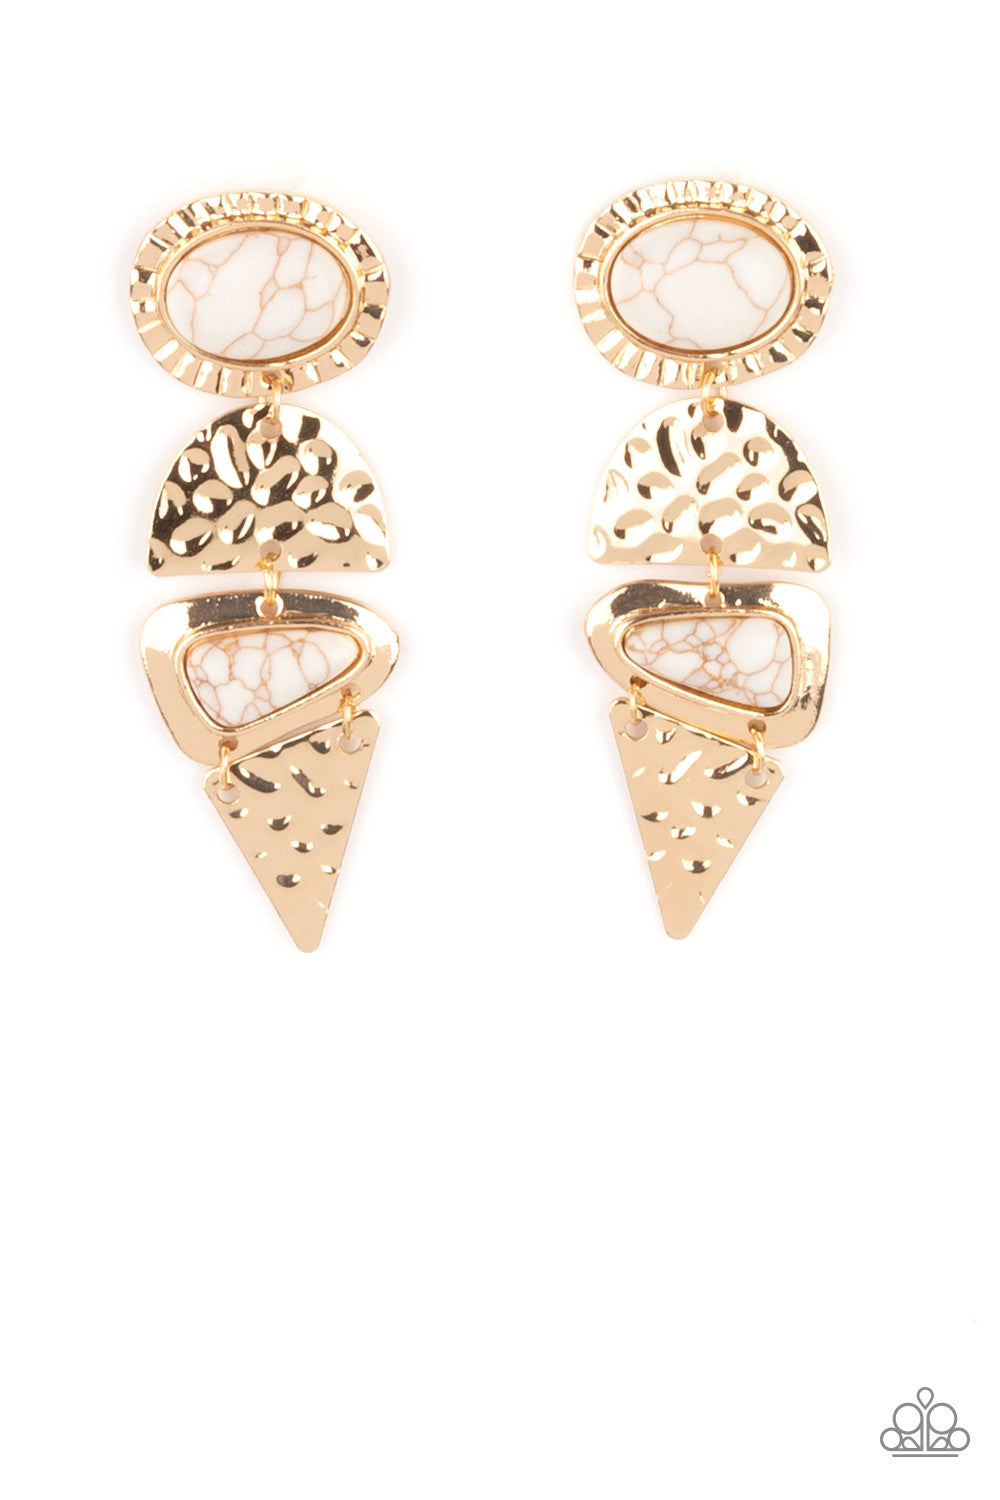 Earthy Extravagance Gold Post Earring - Paparazzi Accessories  Dotted with oval and triangular white stone accents, mismatched gold frames alternate with hammered geometric gold plates, creating an elegantly earthy lure. Earring attaches to a standard post fitting.  All Paparazzi Accessories are lead free and nickel free!   Sold as one pair of post earrings.